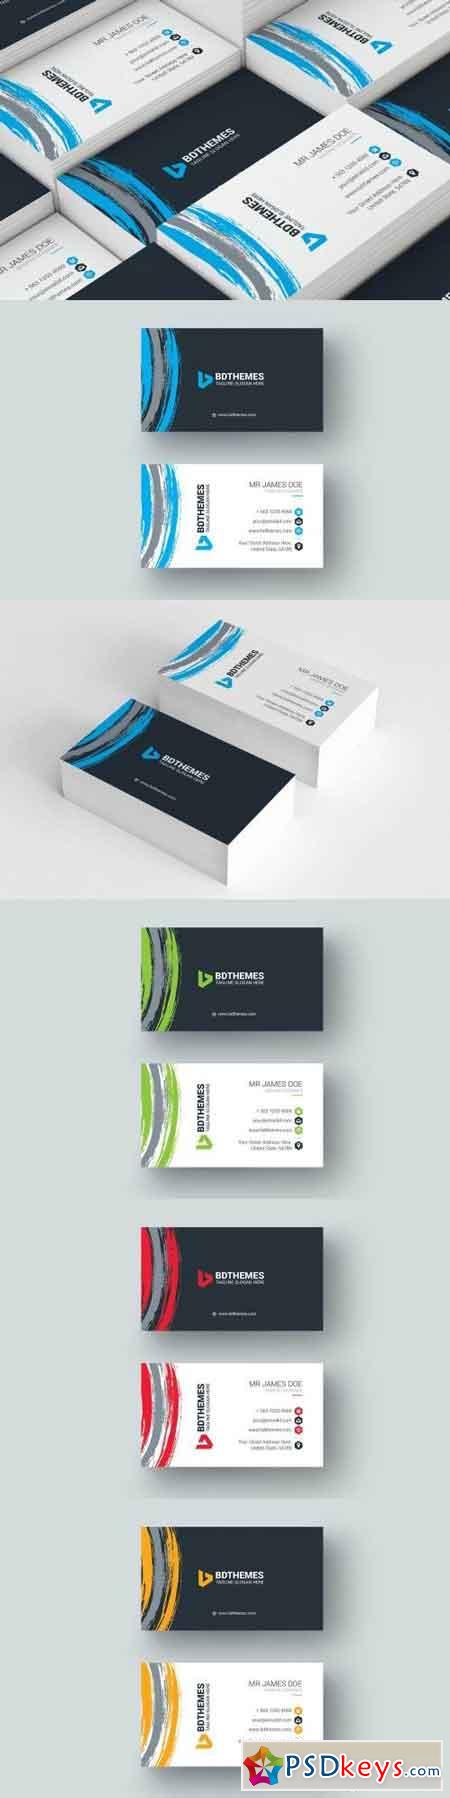 Business Card Template 18